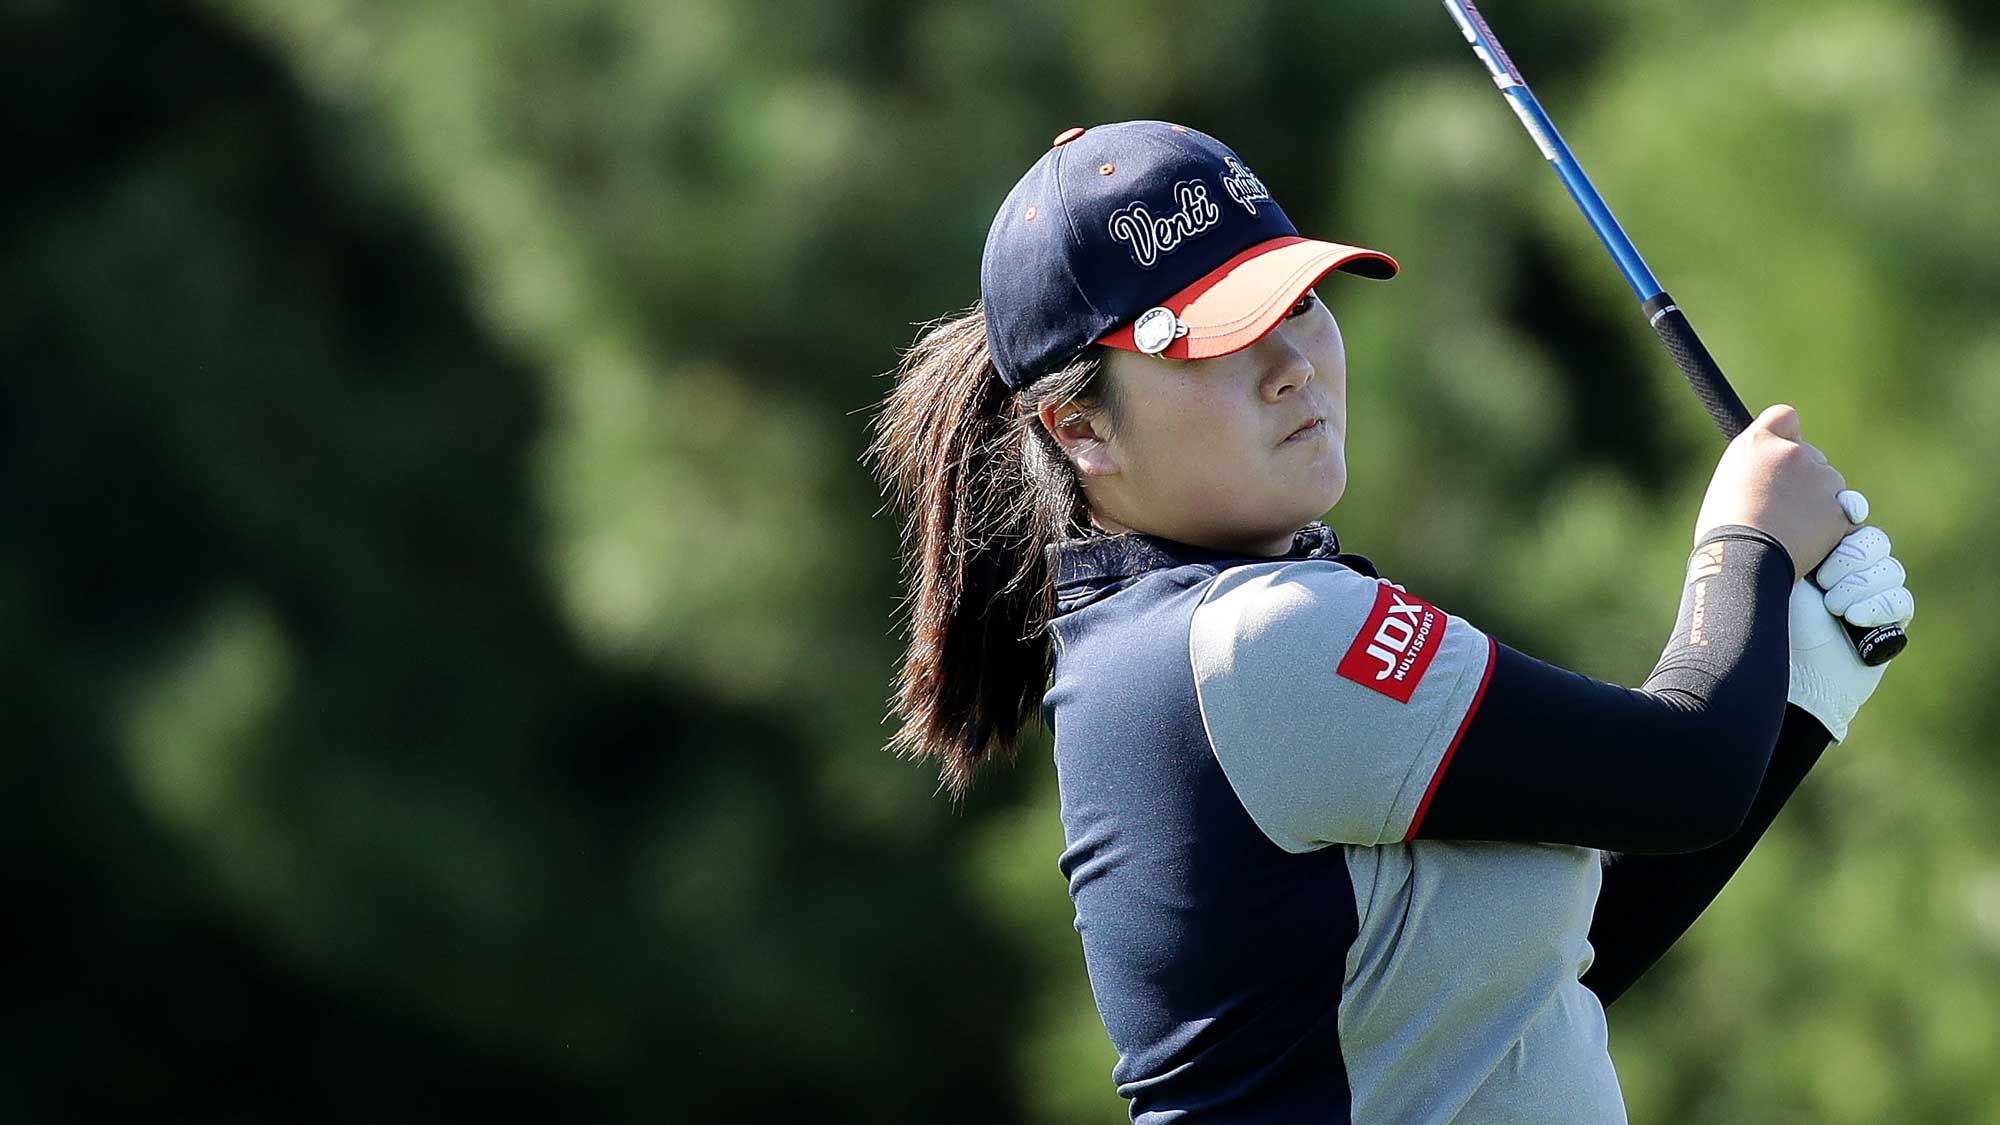 Angel Yin of United States plays a tee shot on the 2nd hole during the second round of the LPGA KEB Hana Bank Championship